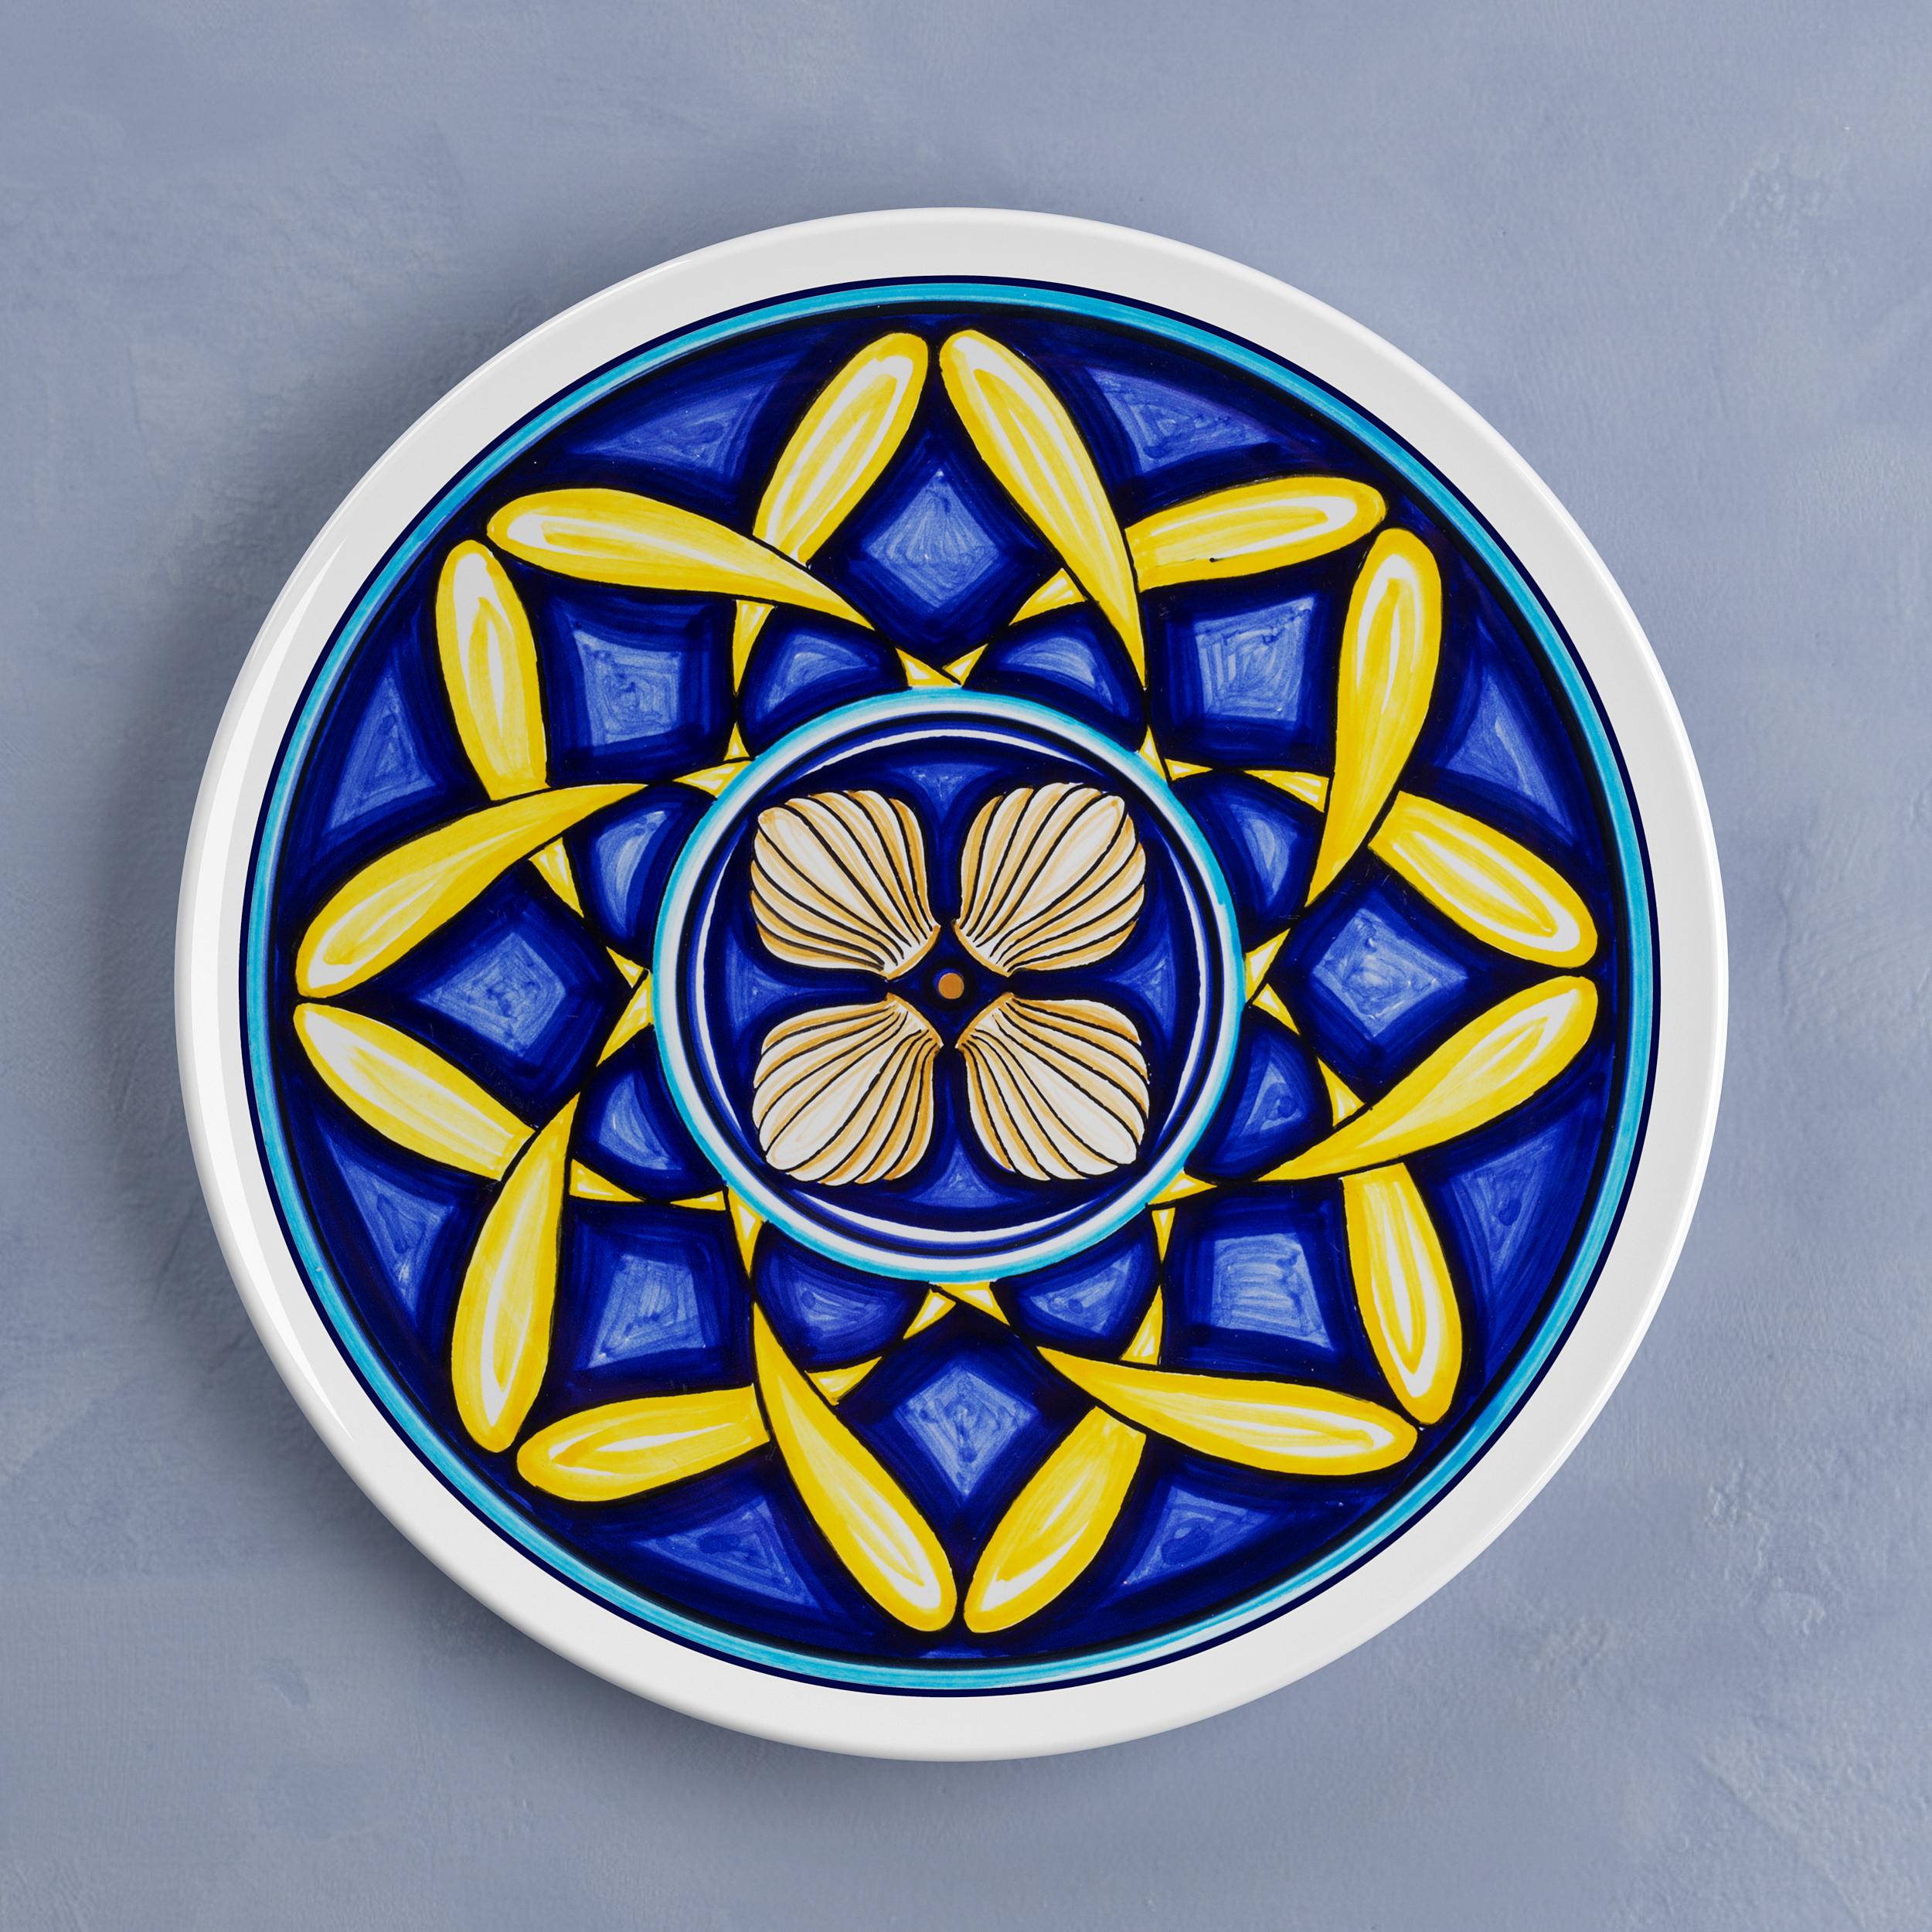 Beautiful set of 28 Sicilian Clay Colapesce handcrafted dinner plates by Crisodora will make an elegant statement with sophisticated Art de la table for every occasion.

Hand-painted

Made in Sicily (Italy) by Master Artisans.